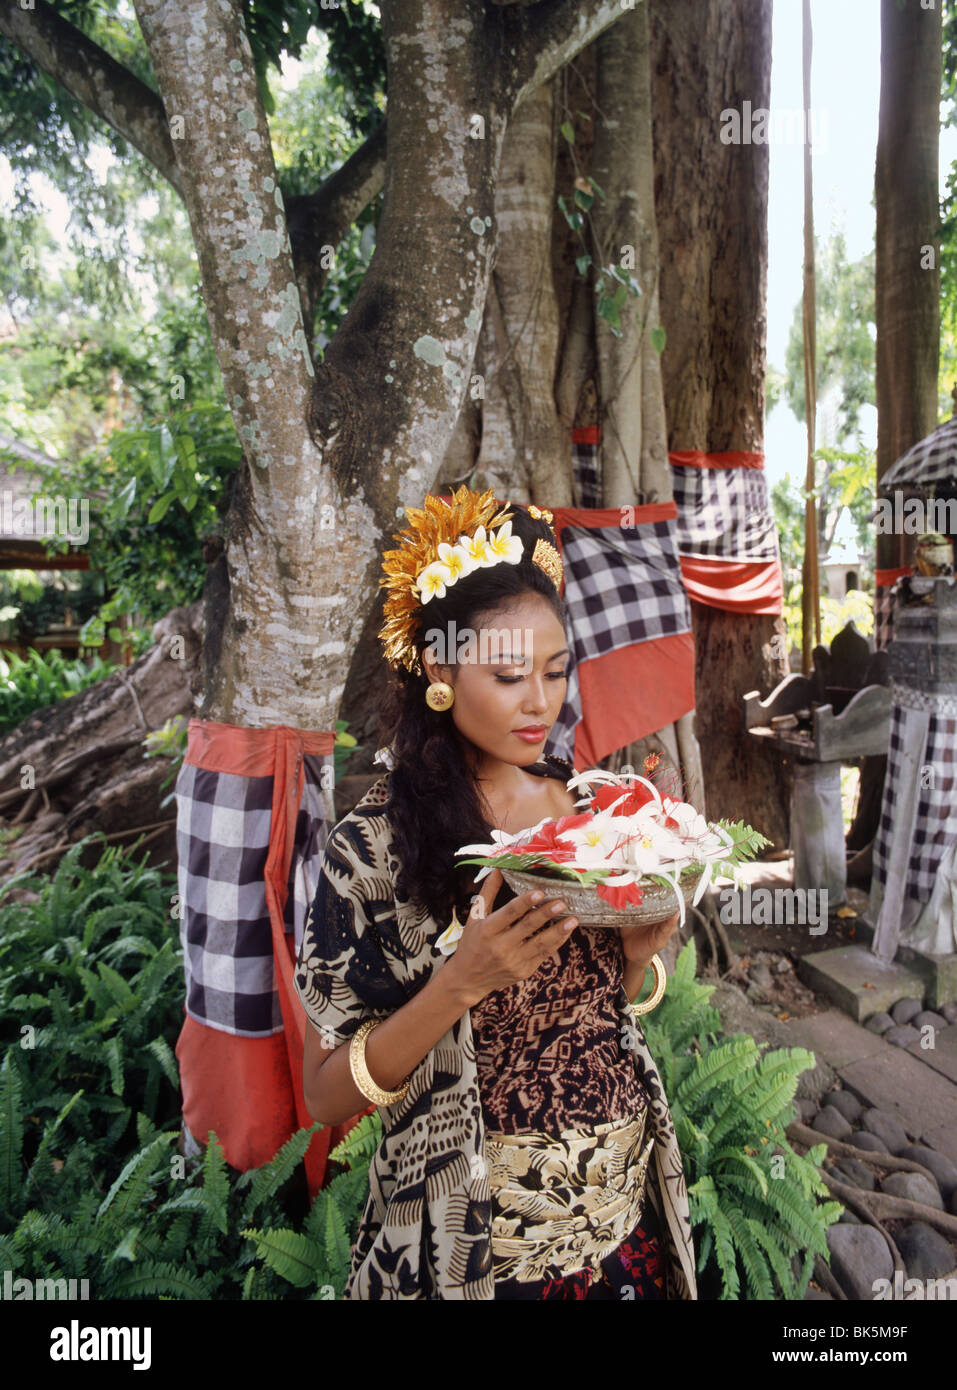 Balinese girl with offerings under a banyan tree in Bali, Indonesia, Southeast Asia, Asia Stock Photo